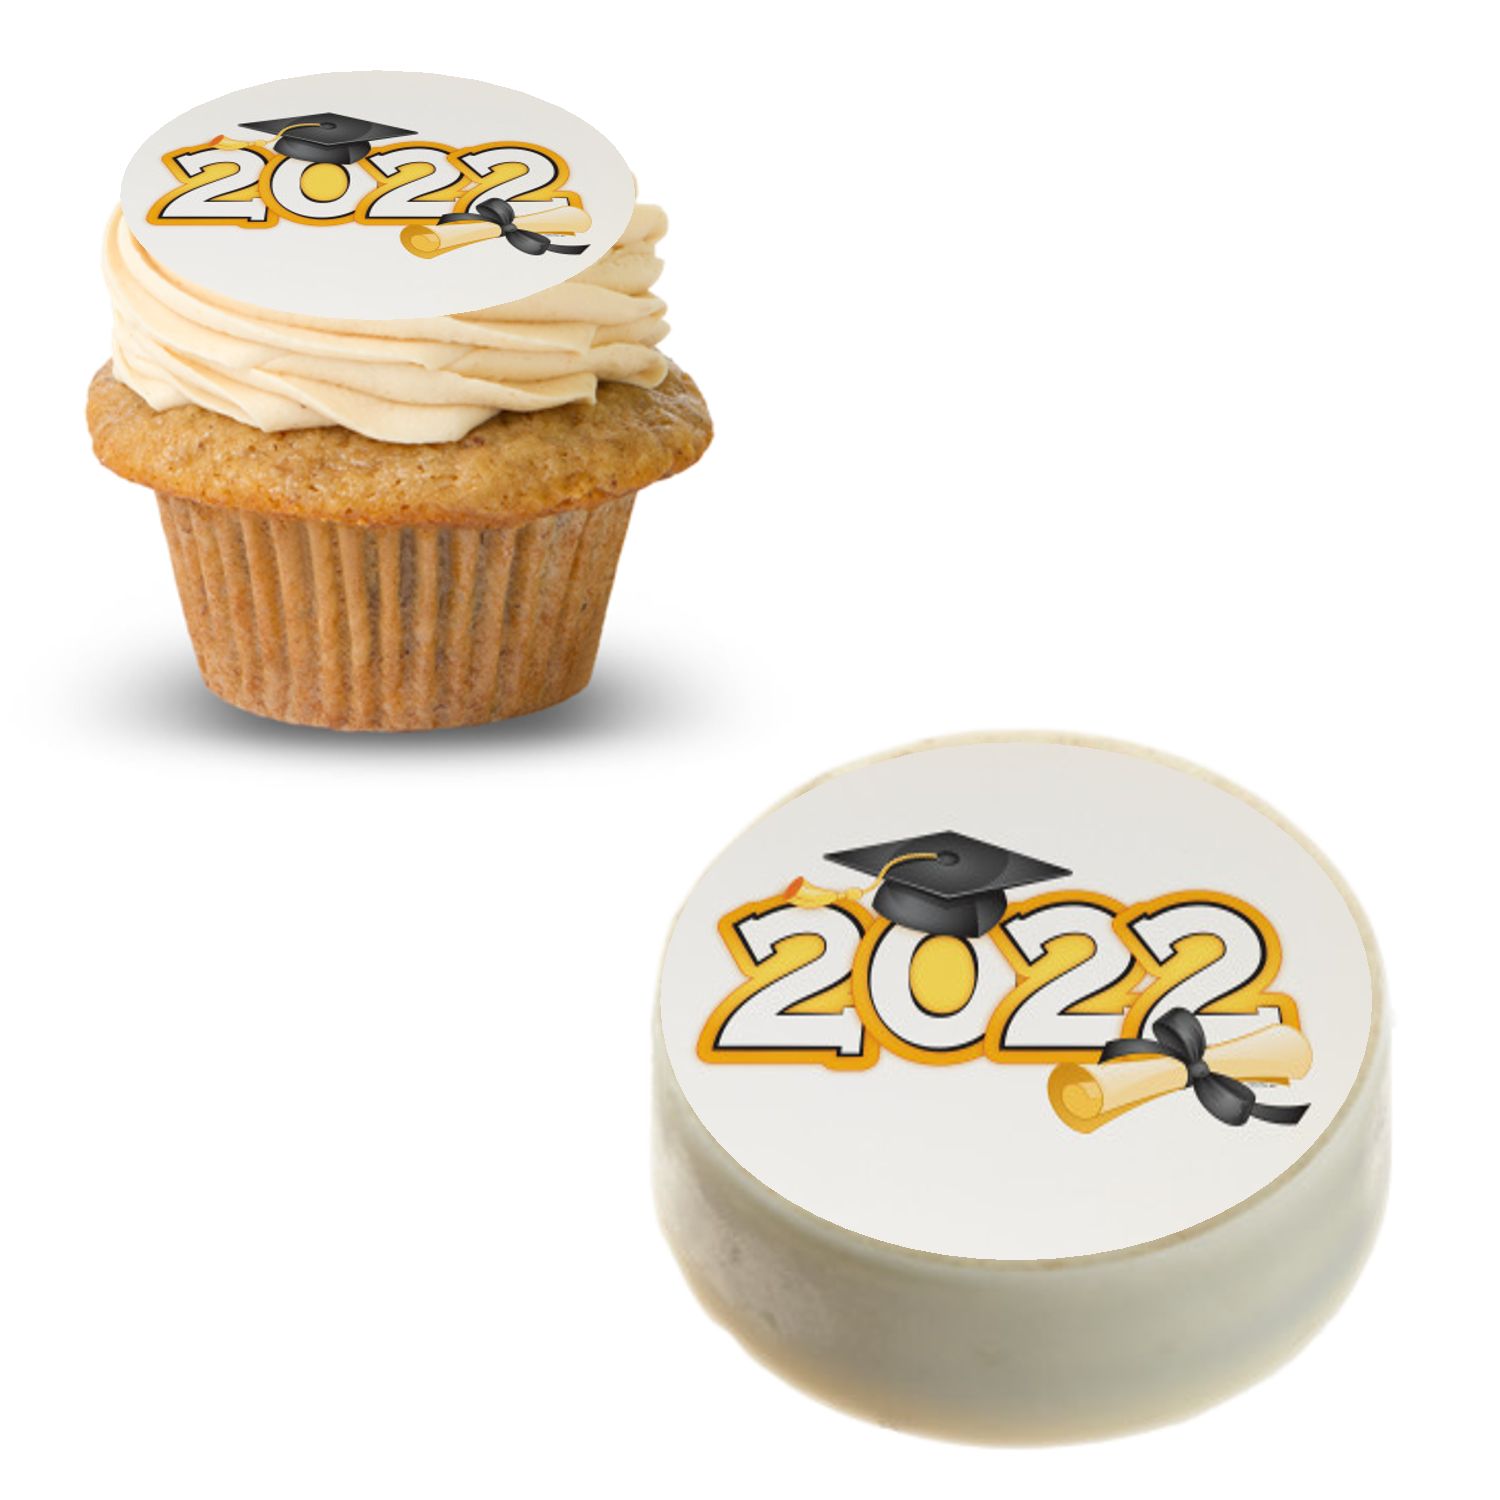 30 x Cup Cake Edible Cake Topper Edible Rice Paper Graduation Party